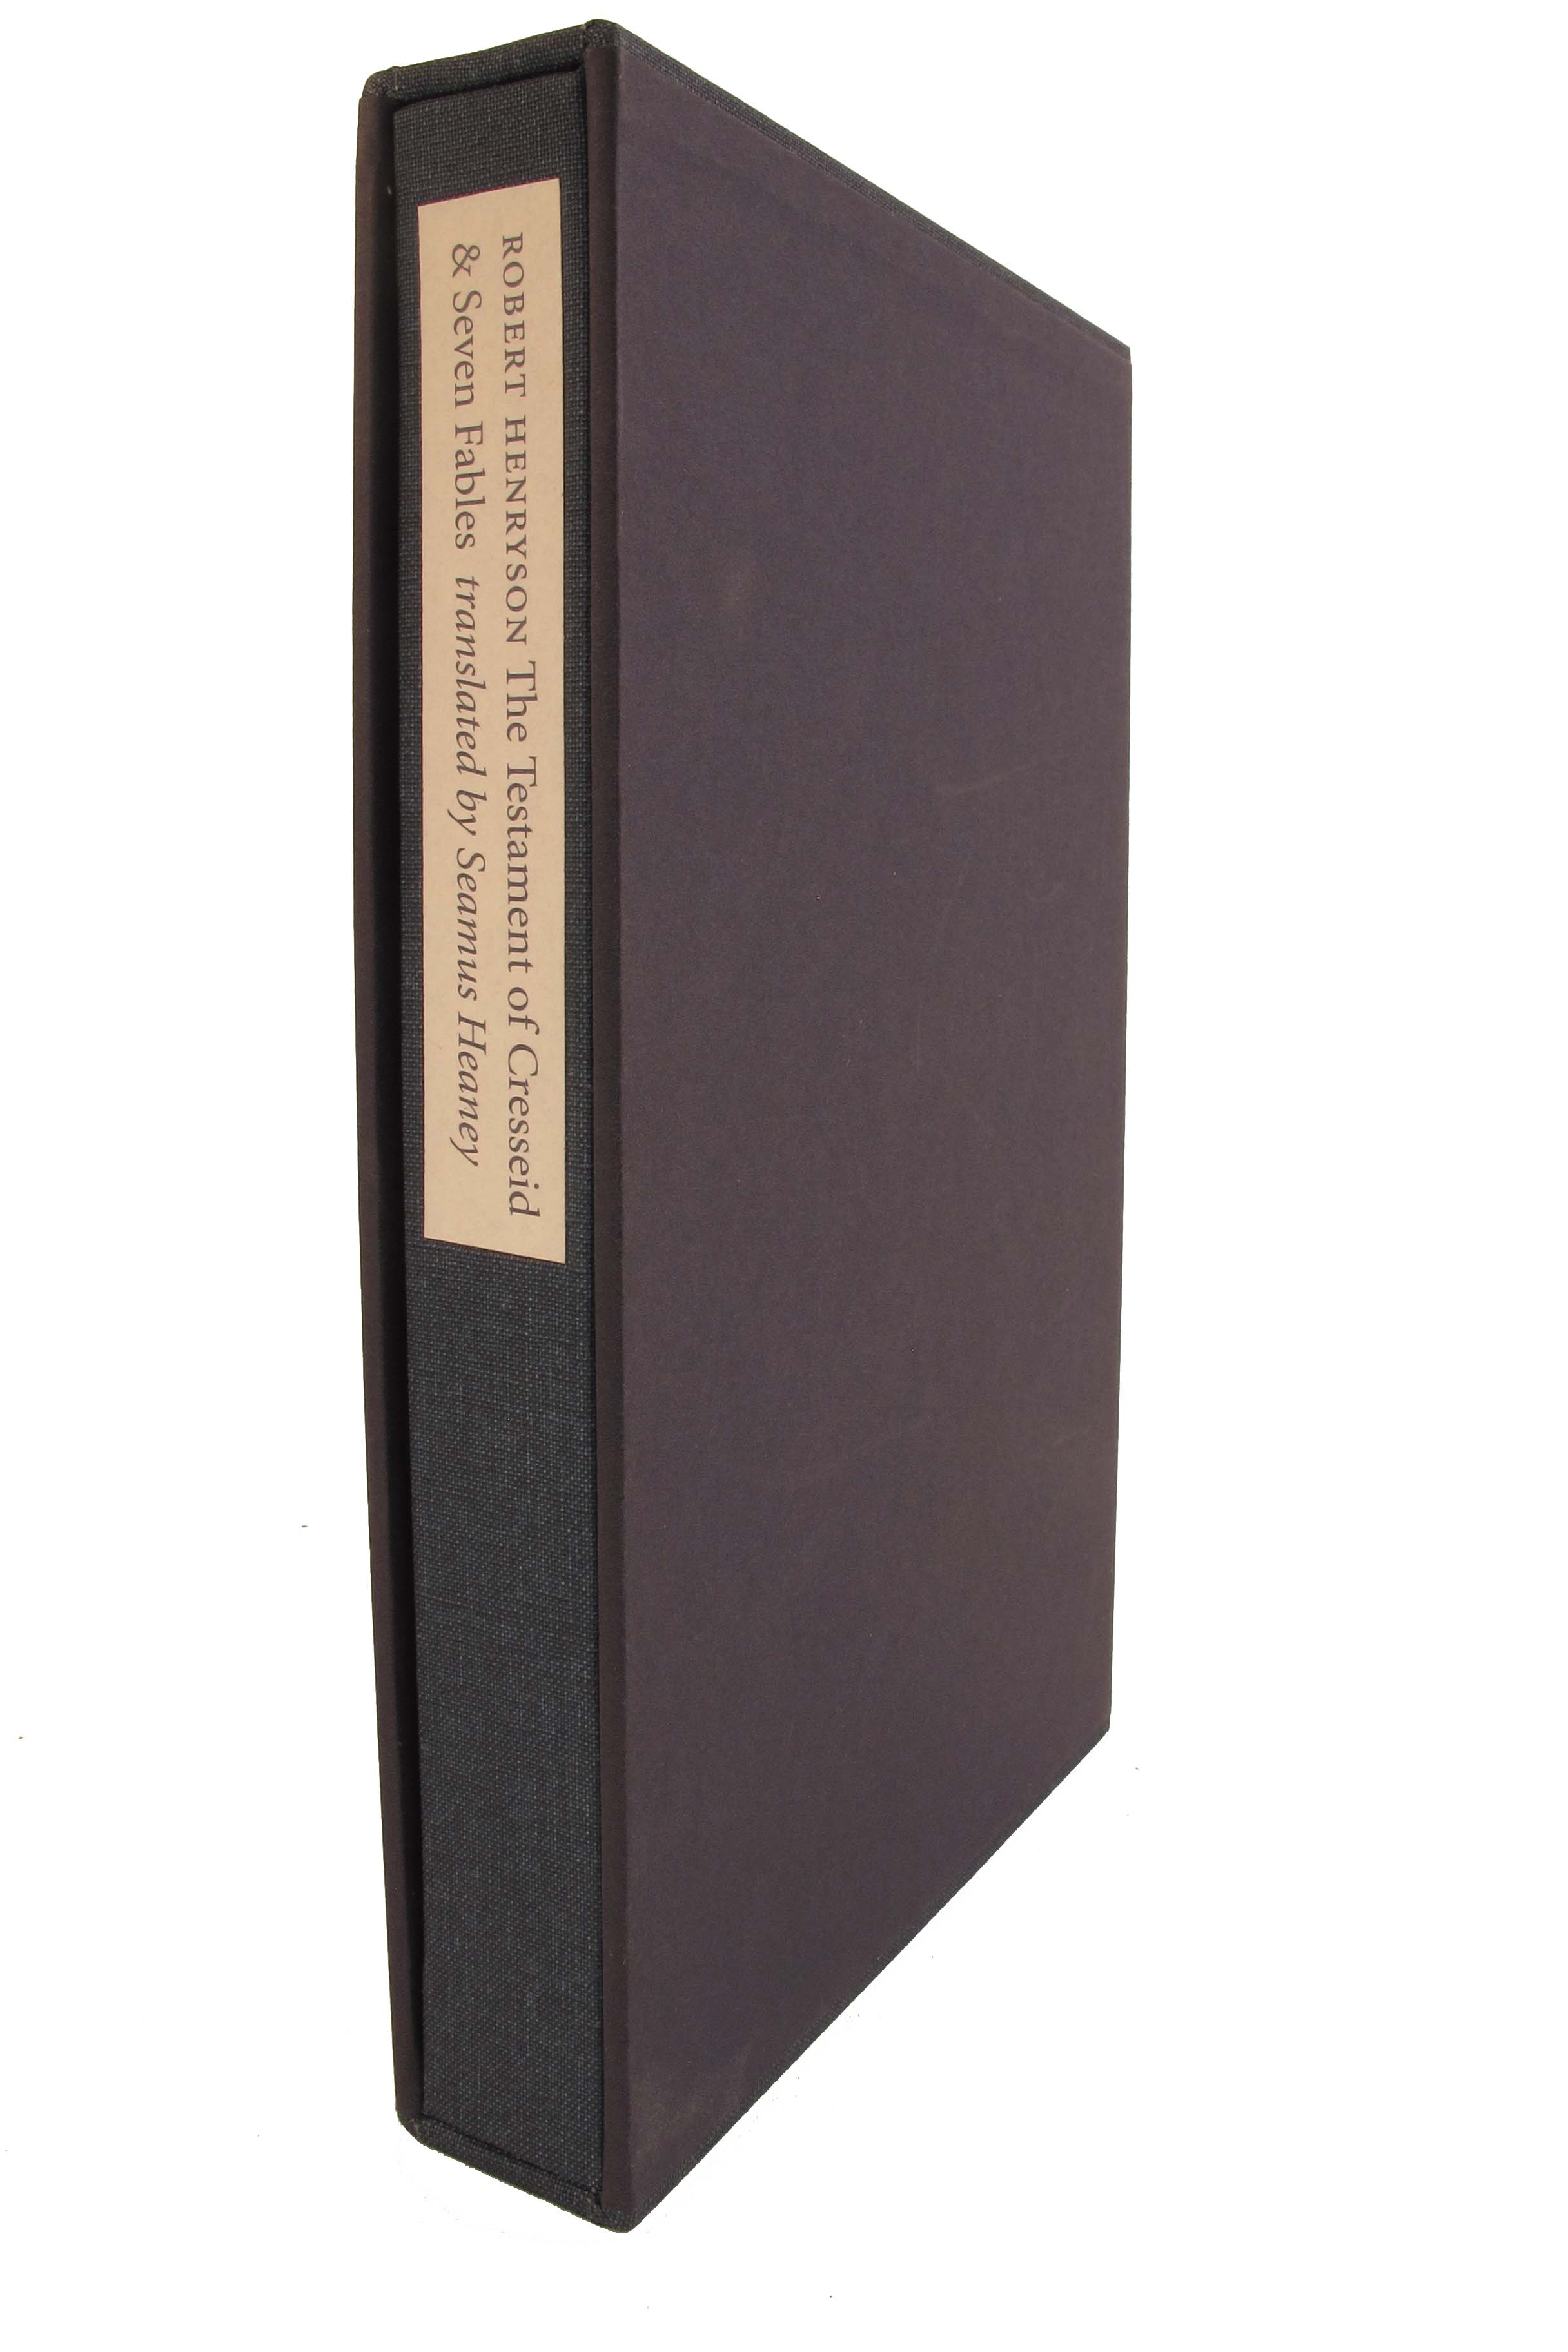 Heaney, Seamus [translator]. The Testament of Cresseid & Seven Fables. Signed limited edition.